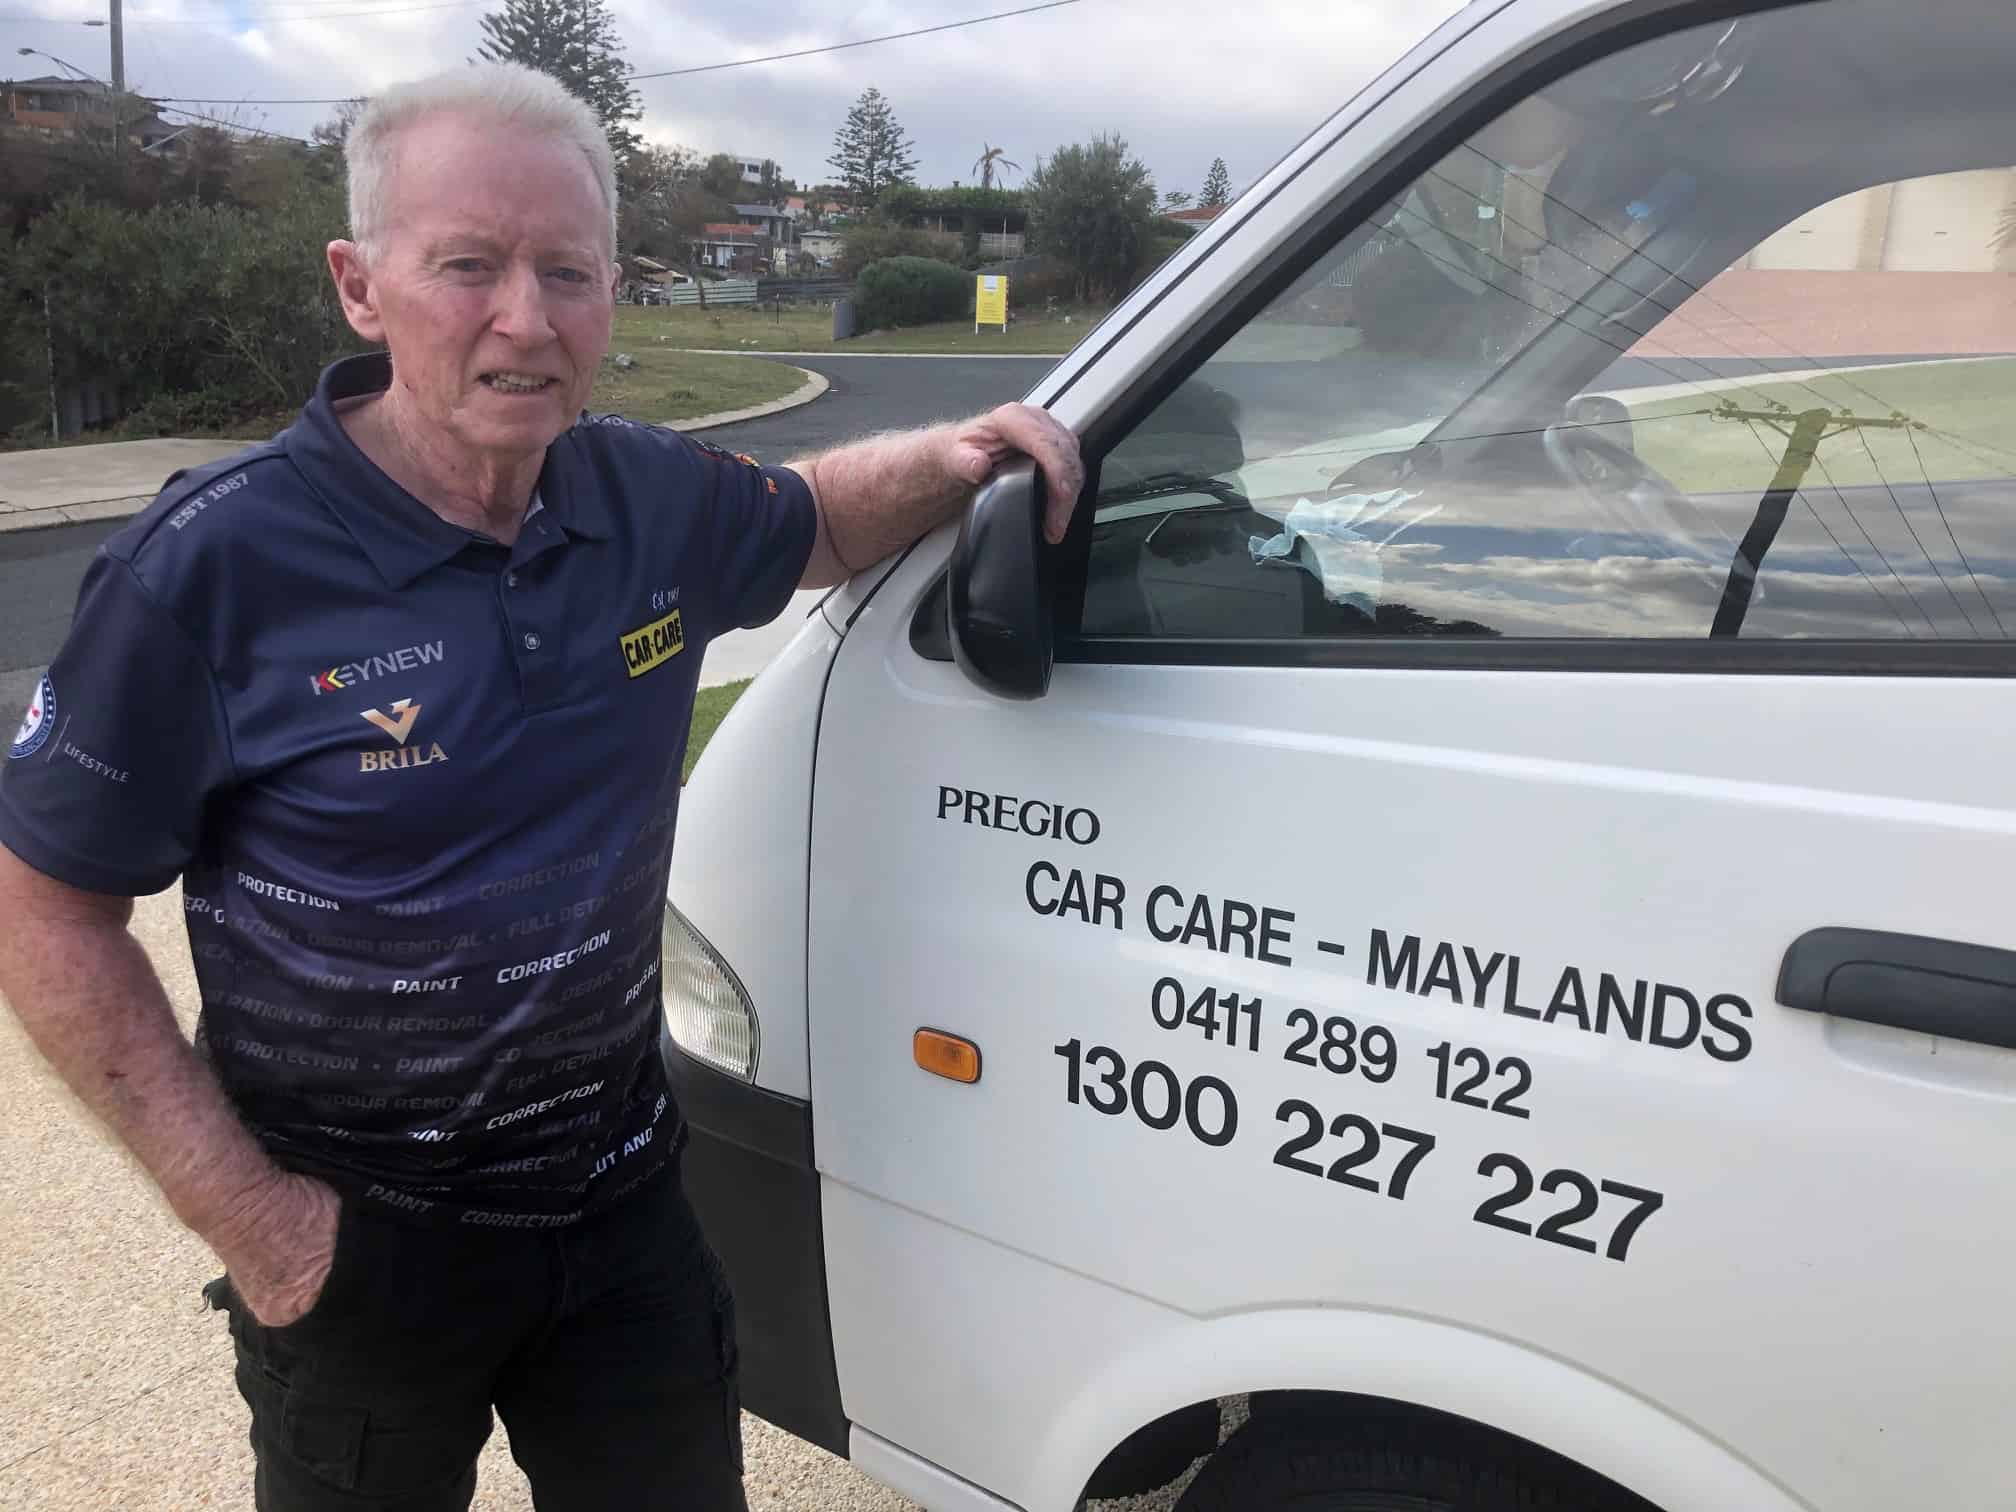 Jim Car Care Maylands leaning on white van